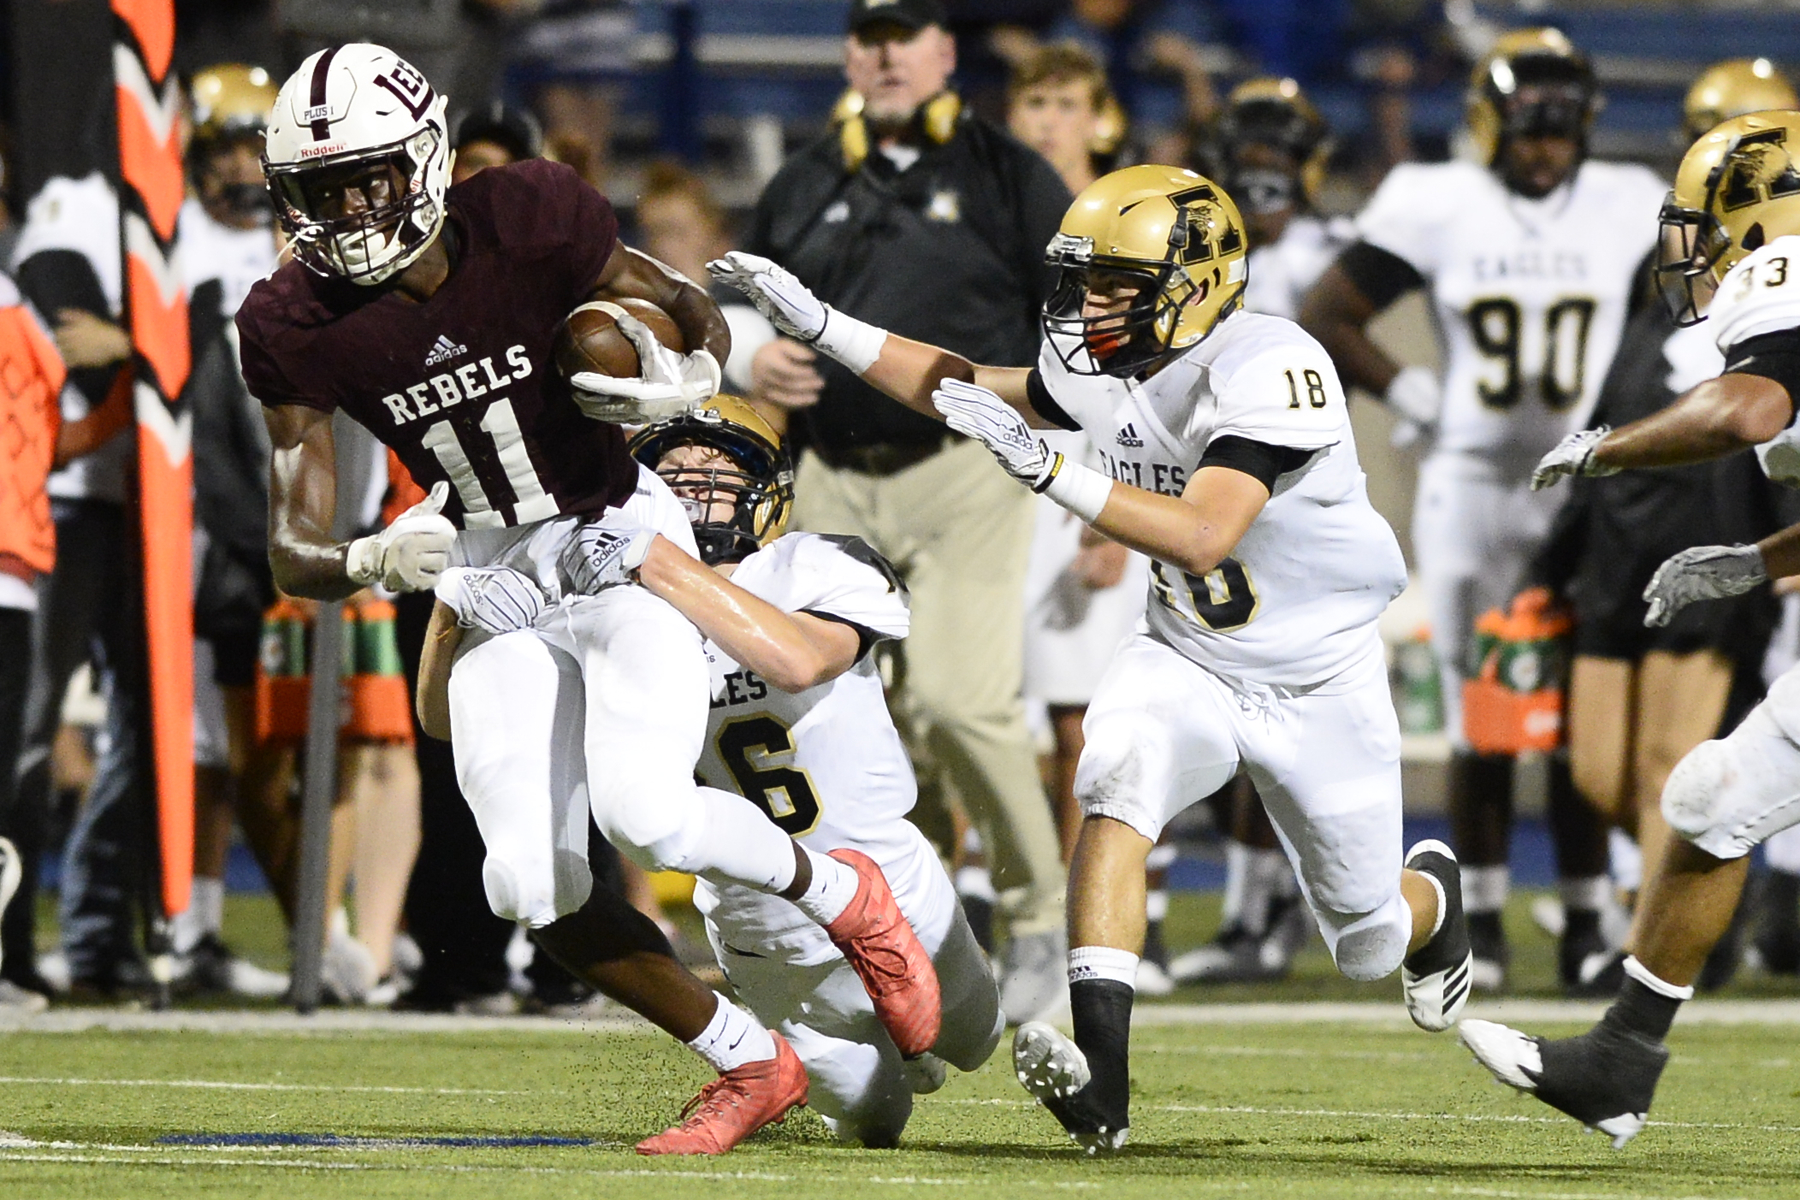 HS FOOTBALL Here’s what to watch for in Week 3